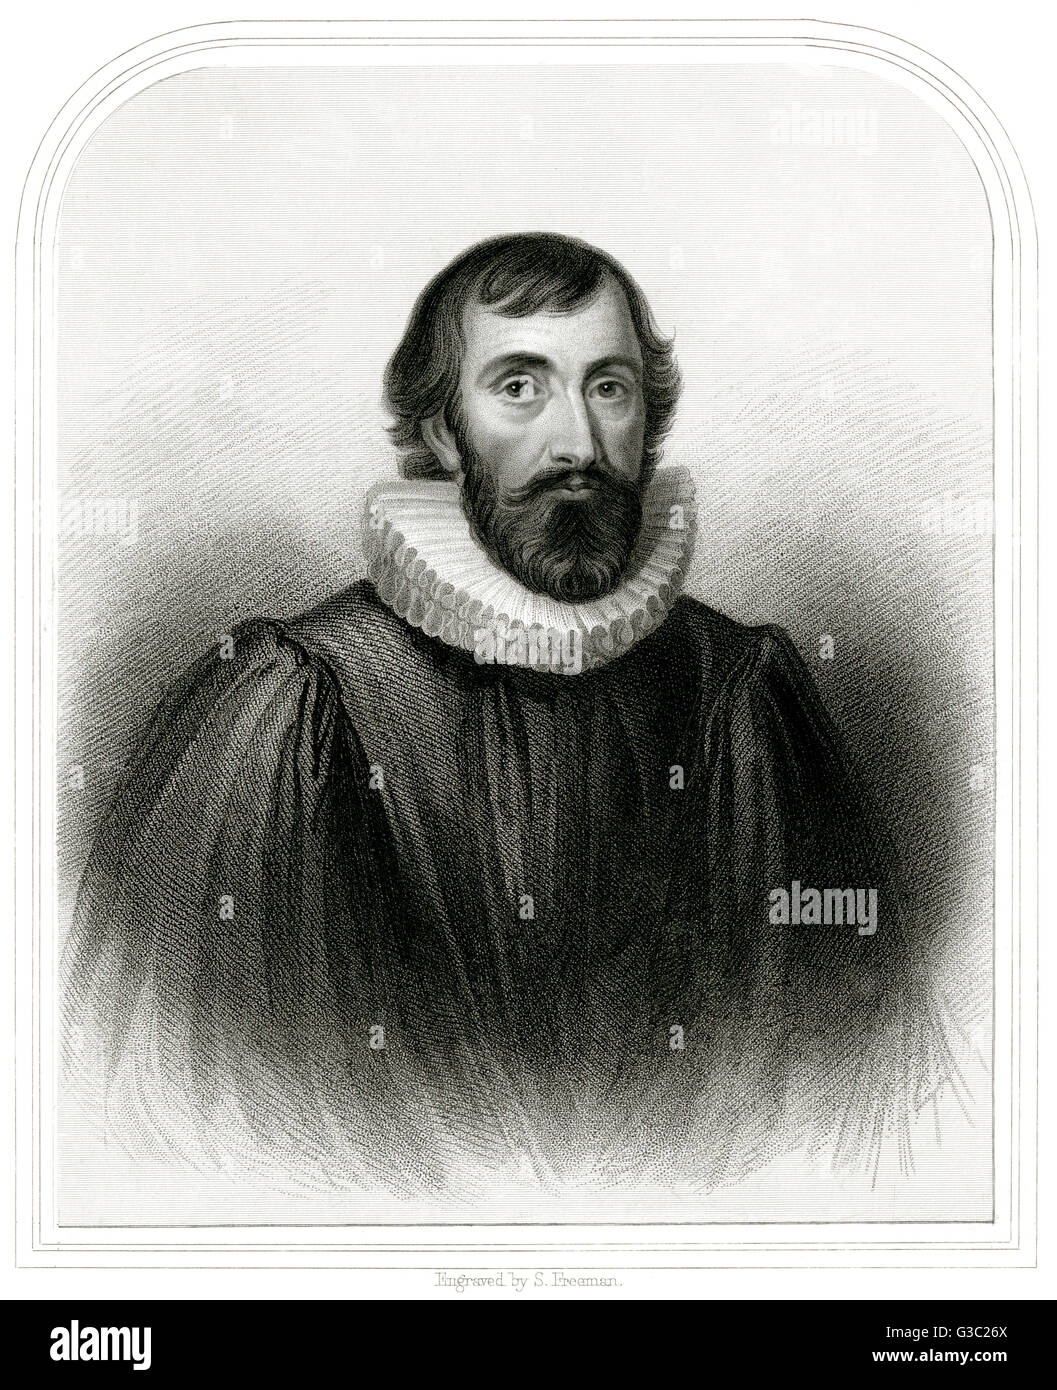 Alexander Henderson (1583-1646) - Scottish Presbyterian divine, theologian, and an important ecclesiastical statesman of his period. He was a chaplain to Charles and also served as a diplomat . He is considered the second founder of the Reformed Church in Stock Photo